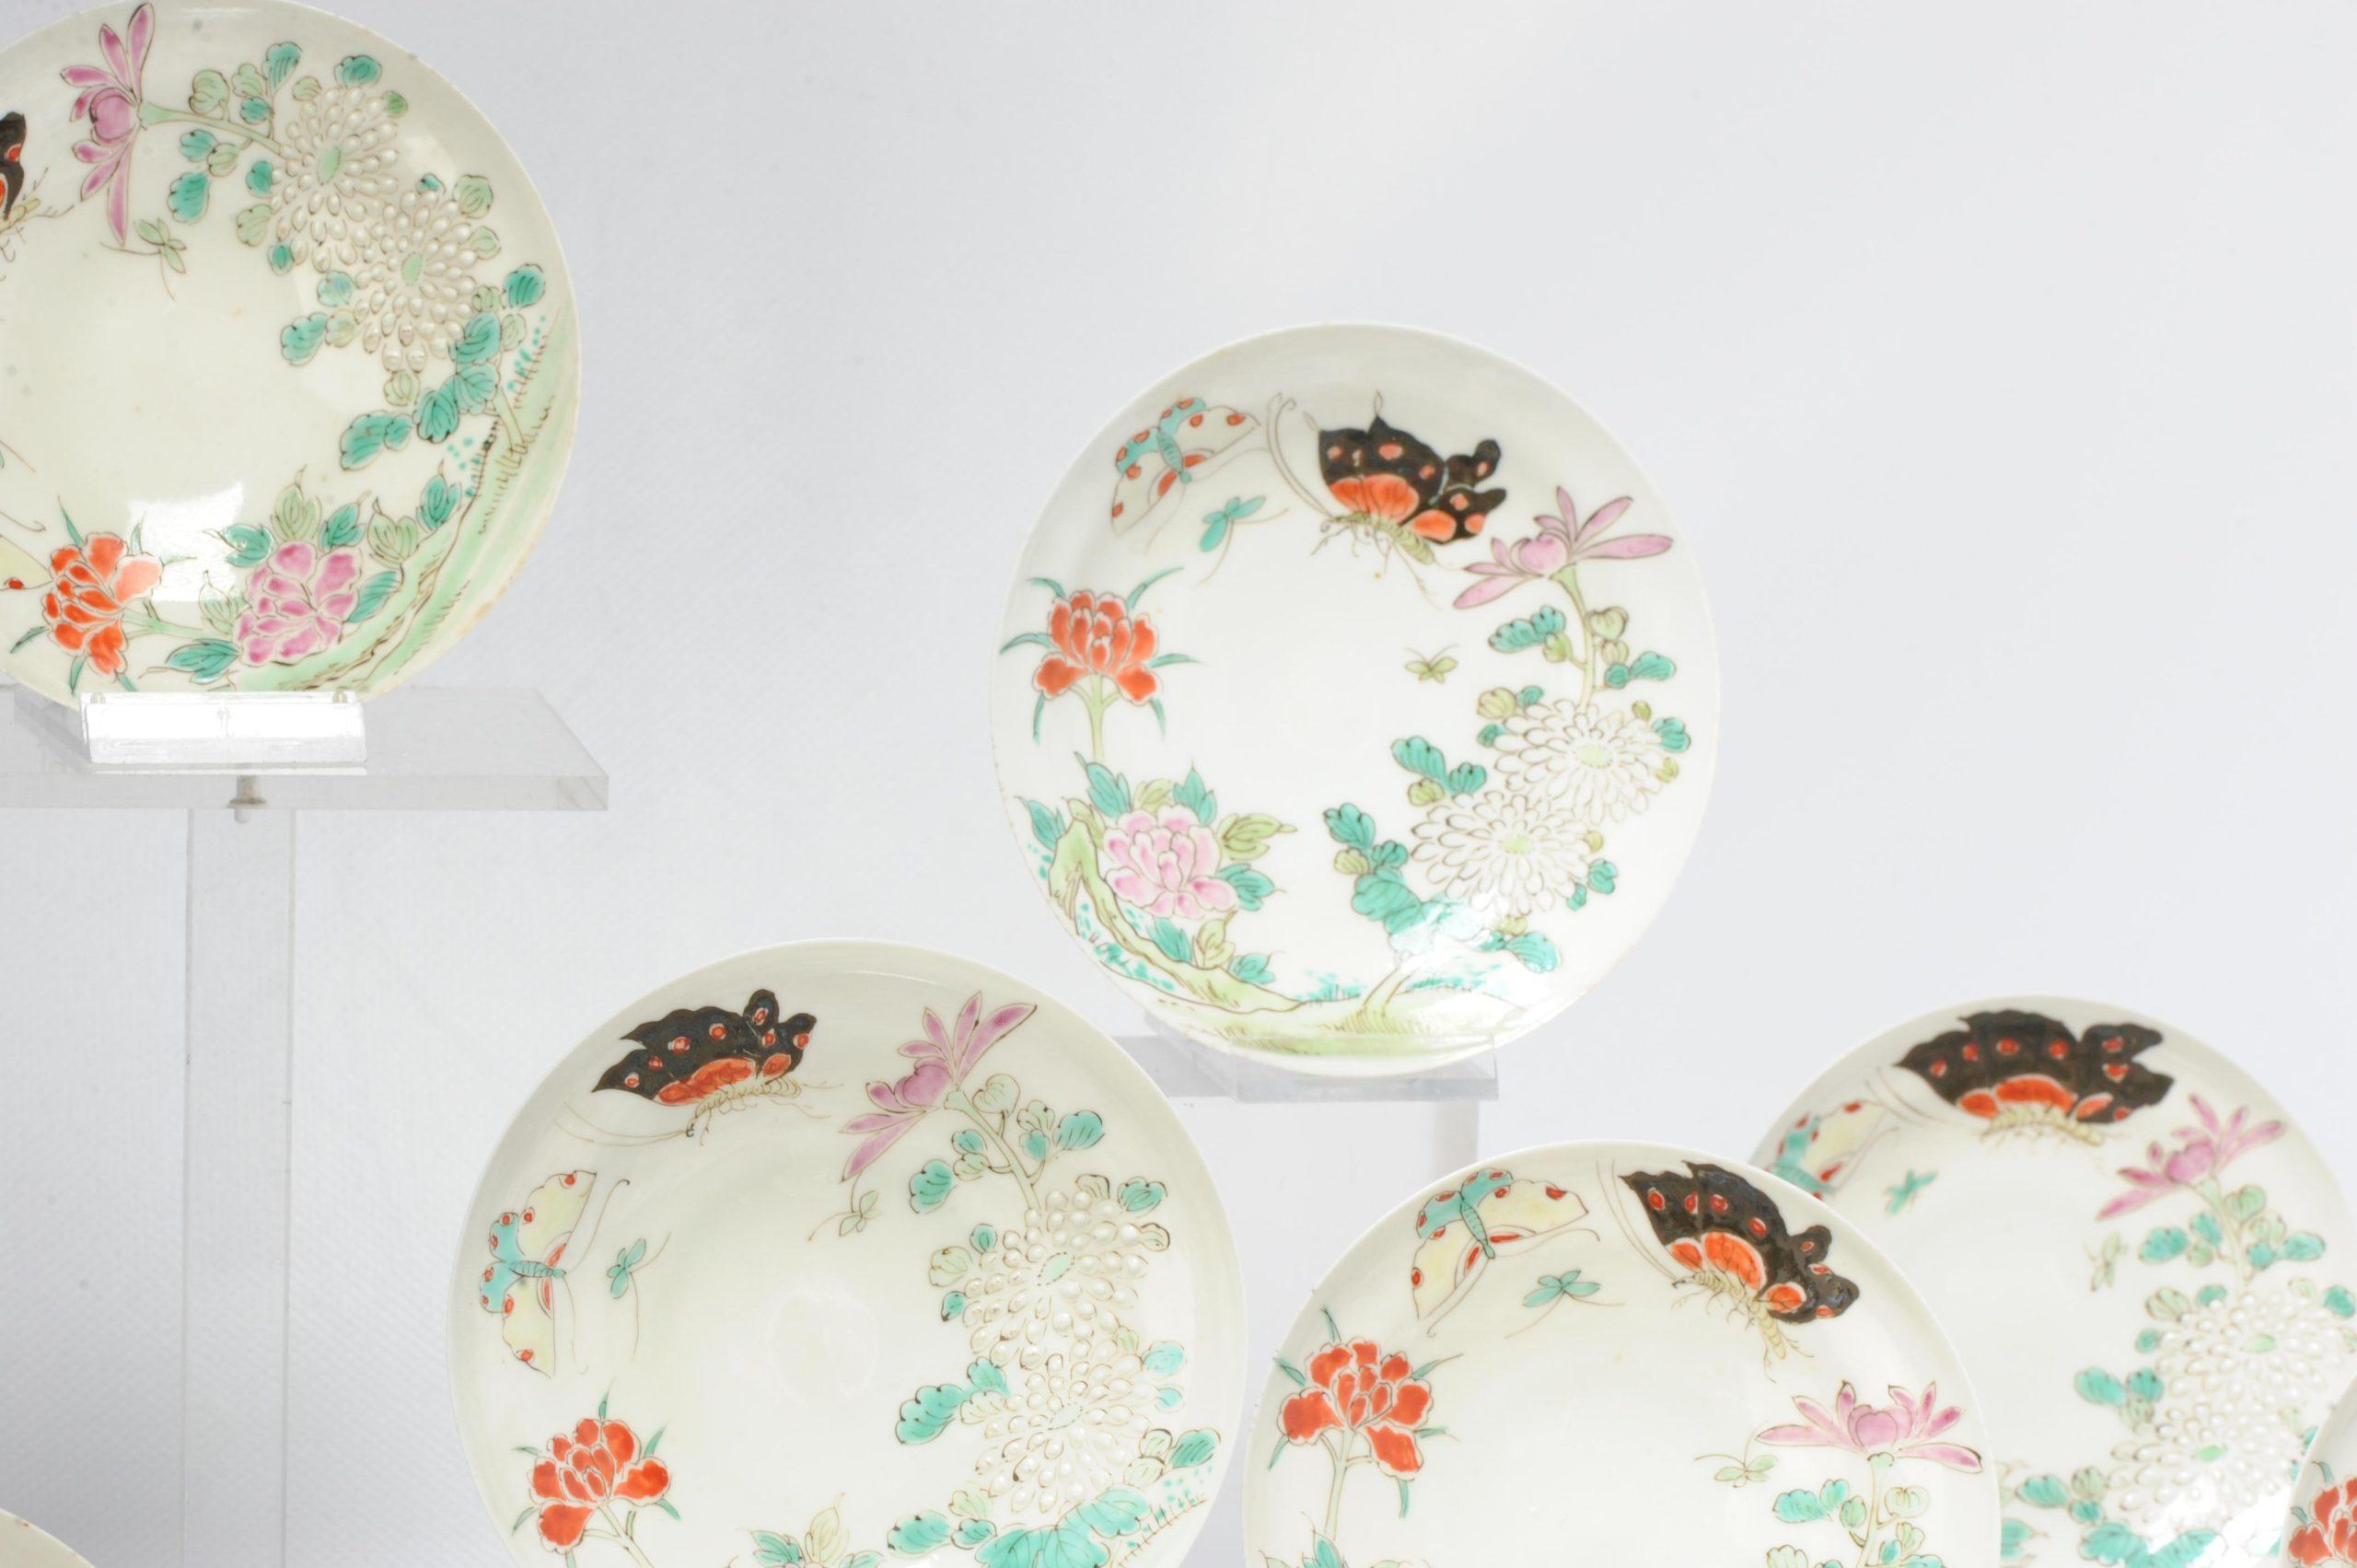 A very nice set of 10 bowls decorated with flowers and butterflies.. They are marked on the base.

Additional information:
Material: Porcelain & Pottery
Region of Origin: Japan
Period: 19th century, 20th century Meiji Periode (1867-1912)
Age: